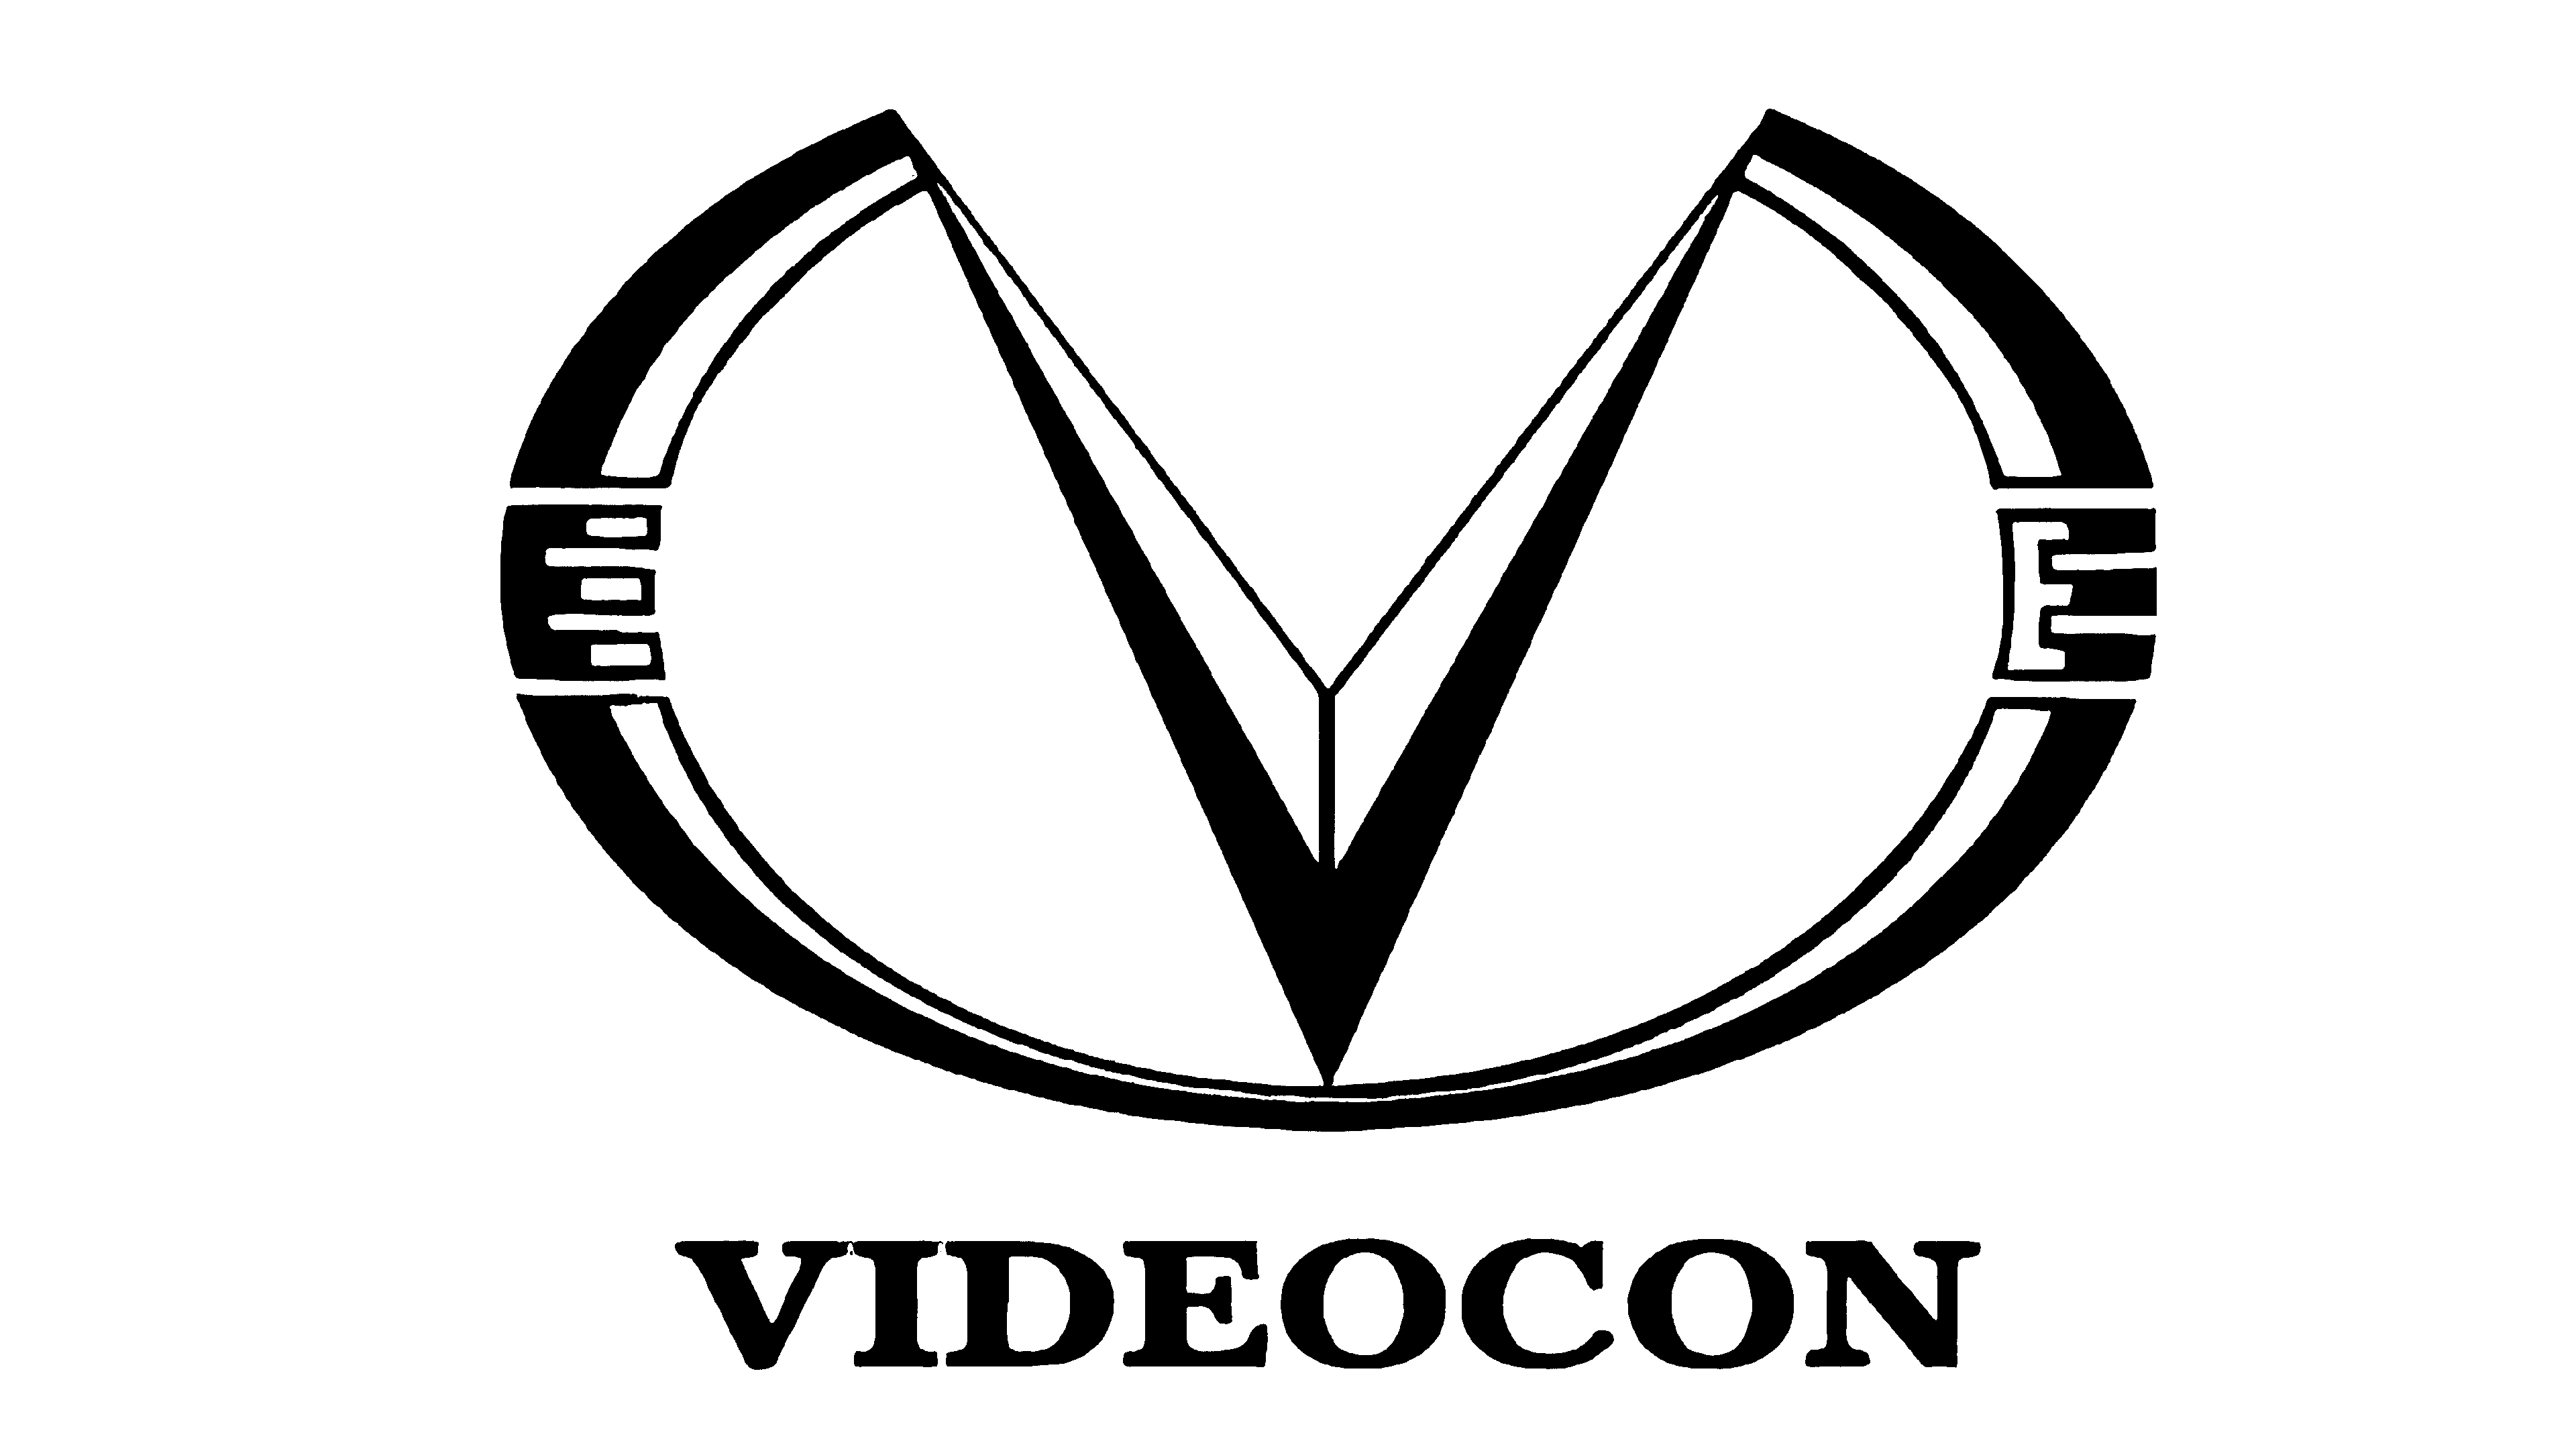 Consolidate all group subsidiaries as one entity: Videocon lenders to NCLT  | Company News - Business Standard